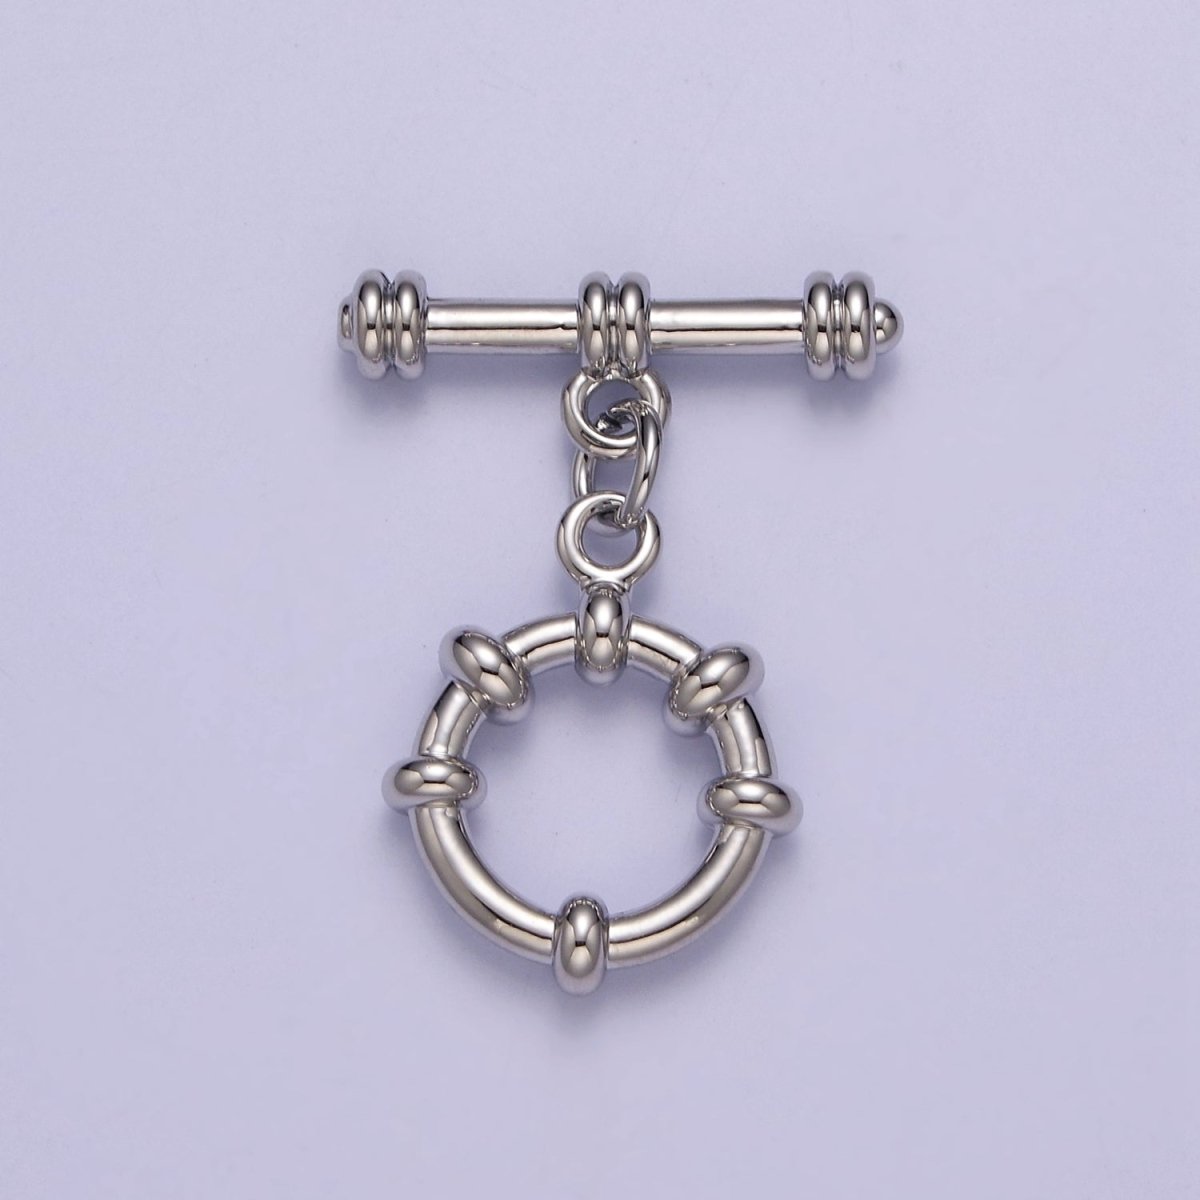 24k Gold Filled Round Toggle Clasp, Jewelry Clasp Sailor OT Clasp Findings L-690 L-691 L-692 - DLUXCA